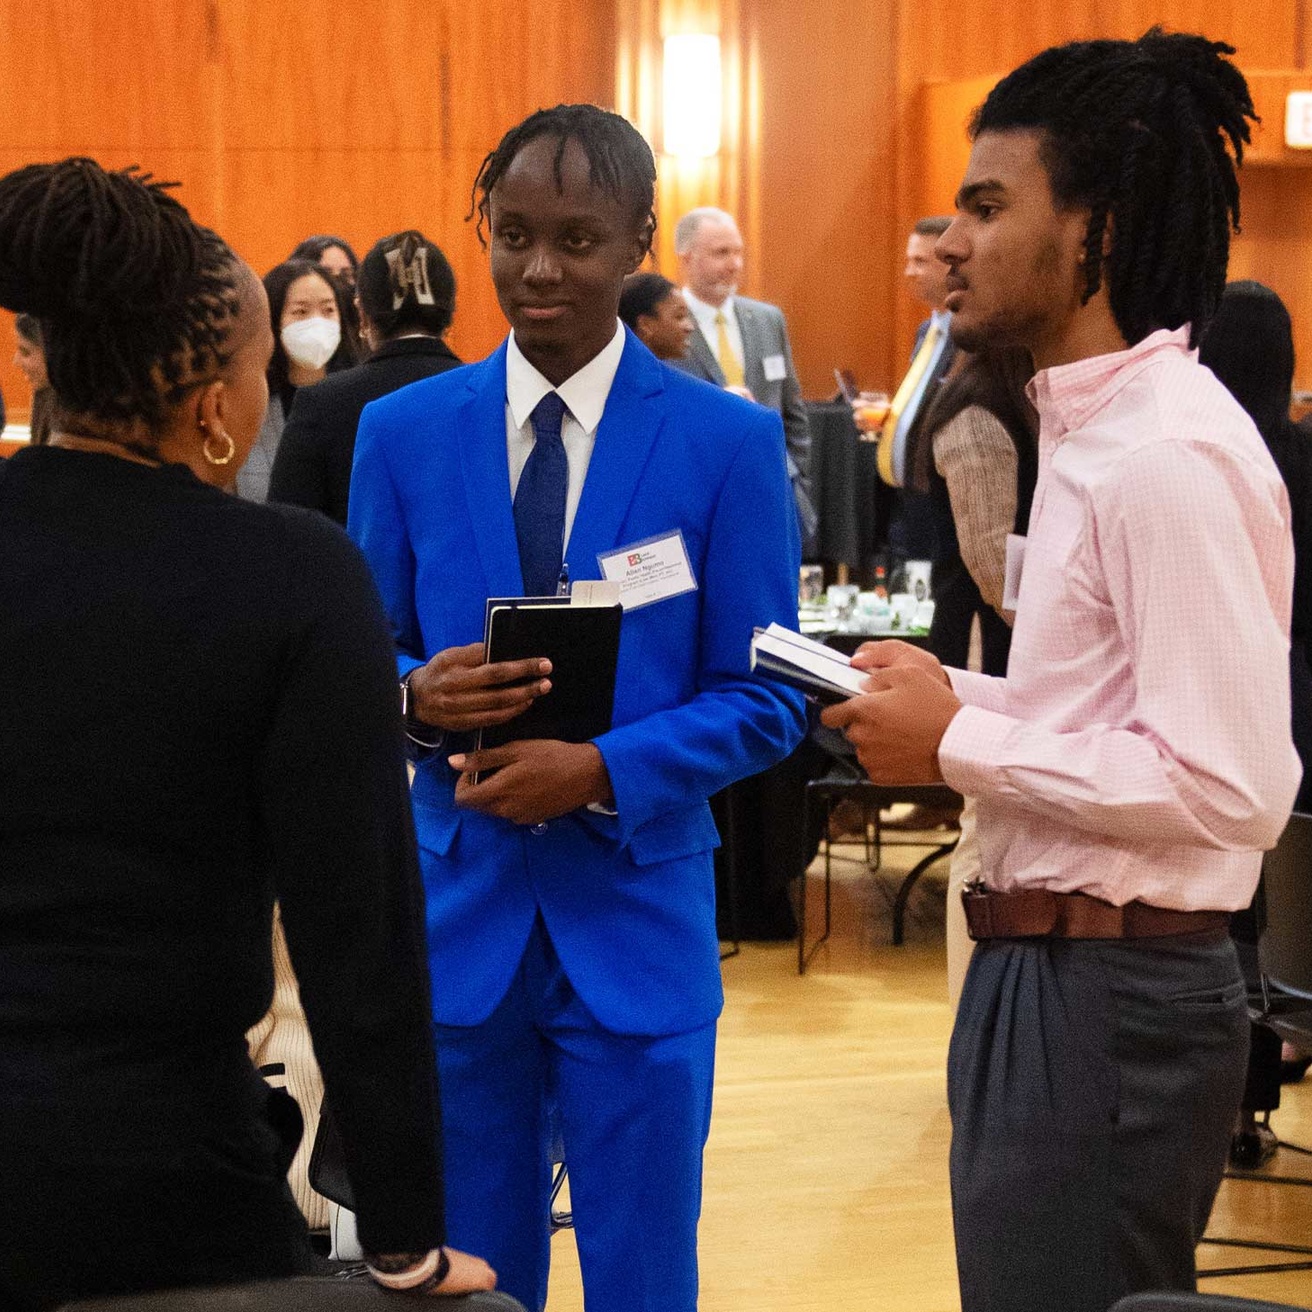 Black in Business event